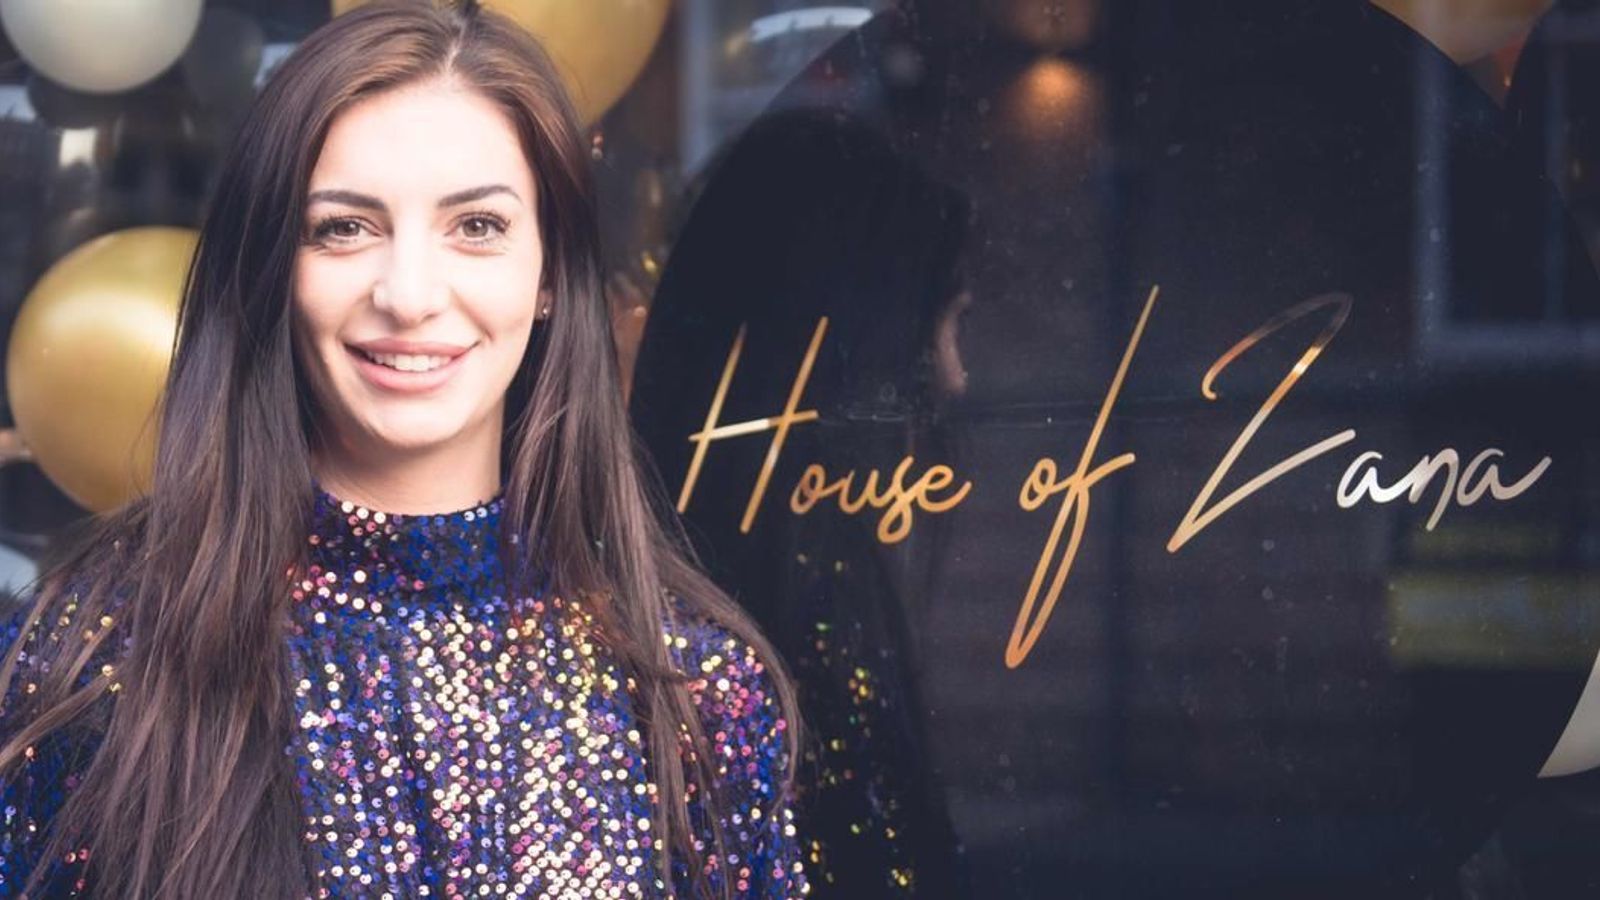 Zara loses name-change bid against owner of small fashion firm House of Zana